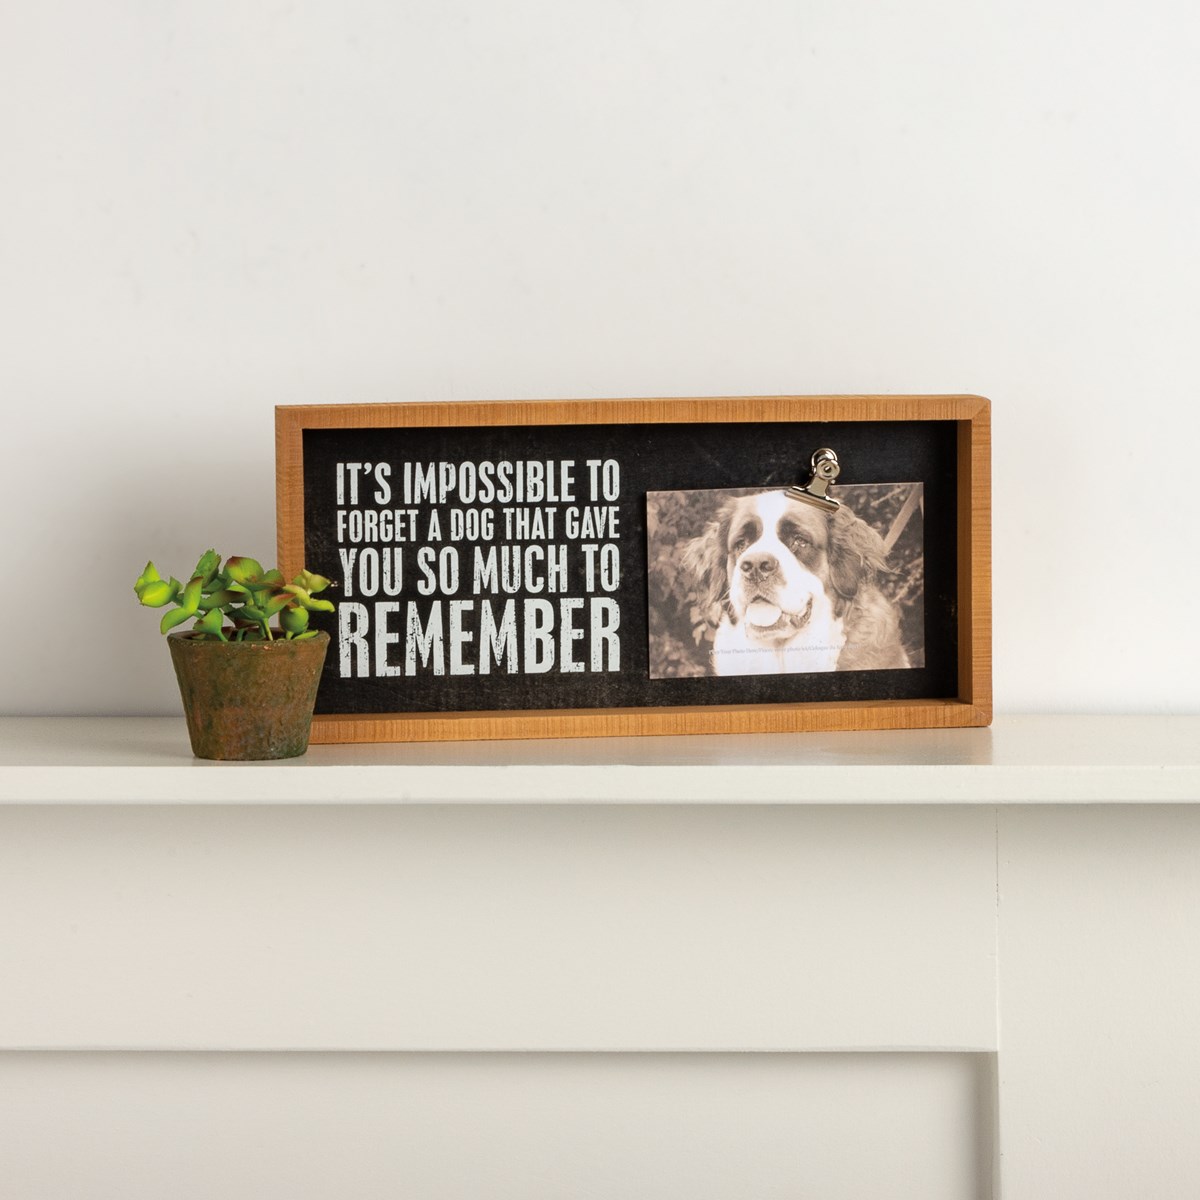 It's Impossible To Forget A Dog Inset Box Frame - Wood, Metal